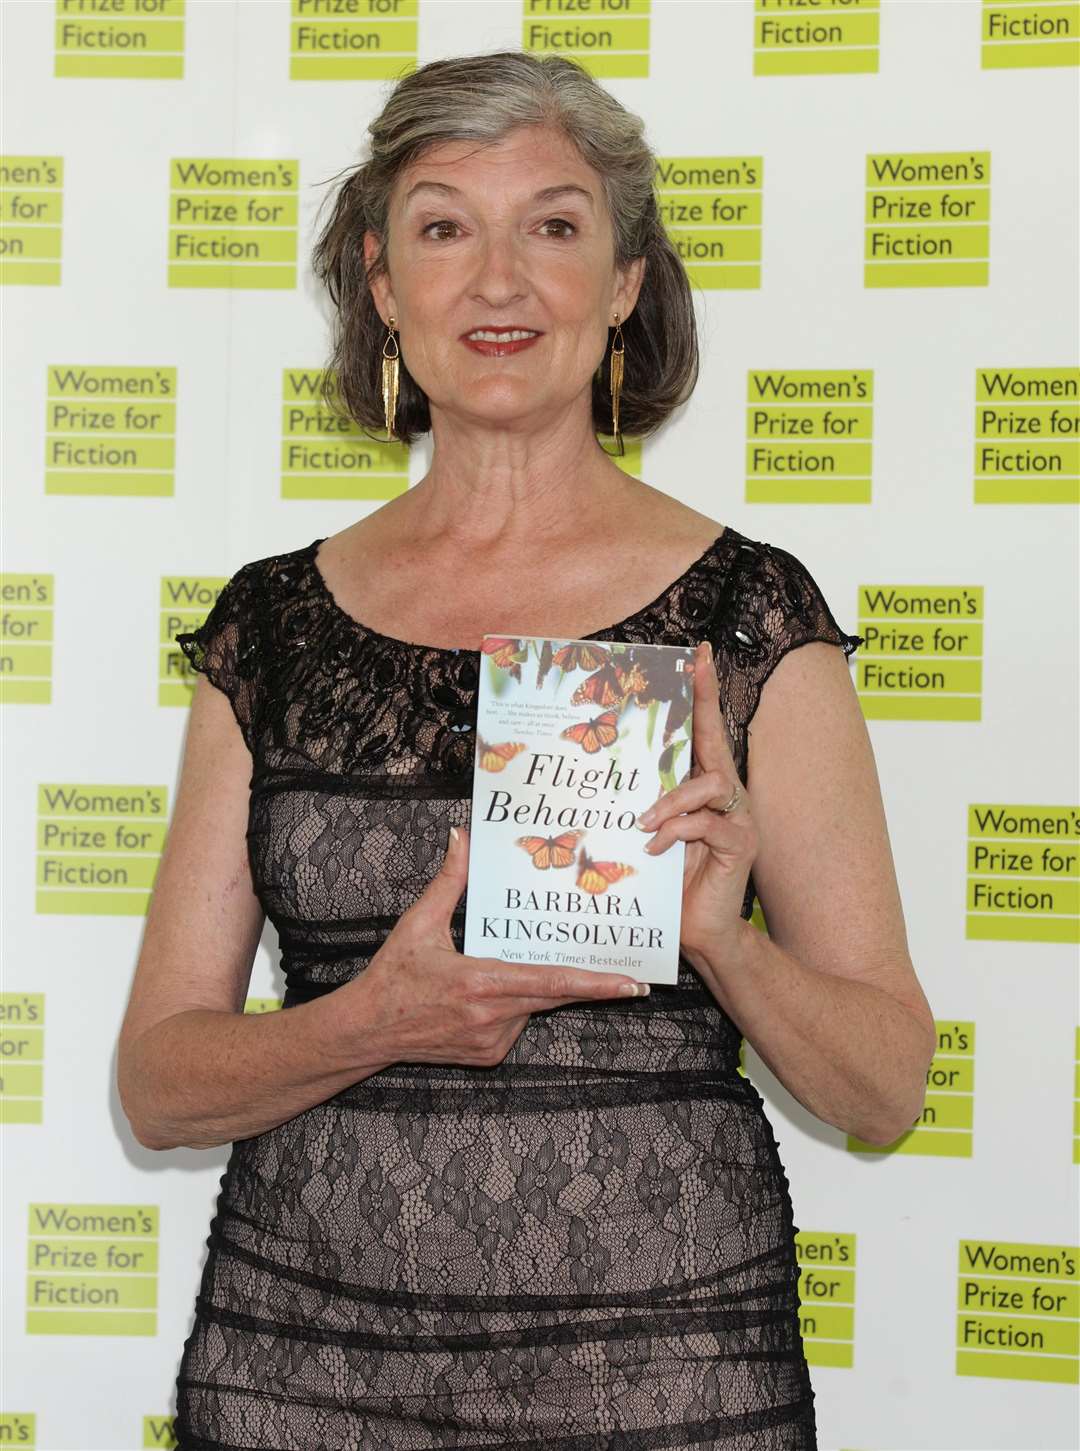 Barbara Kingsolver is another author who has previously won the Women’s Prize for Fiction (Yui Mok/PA)